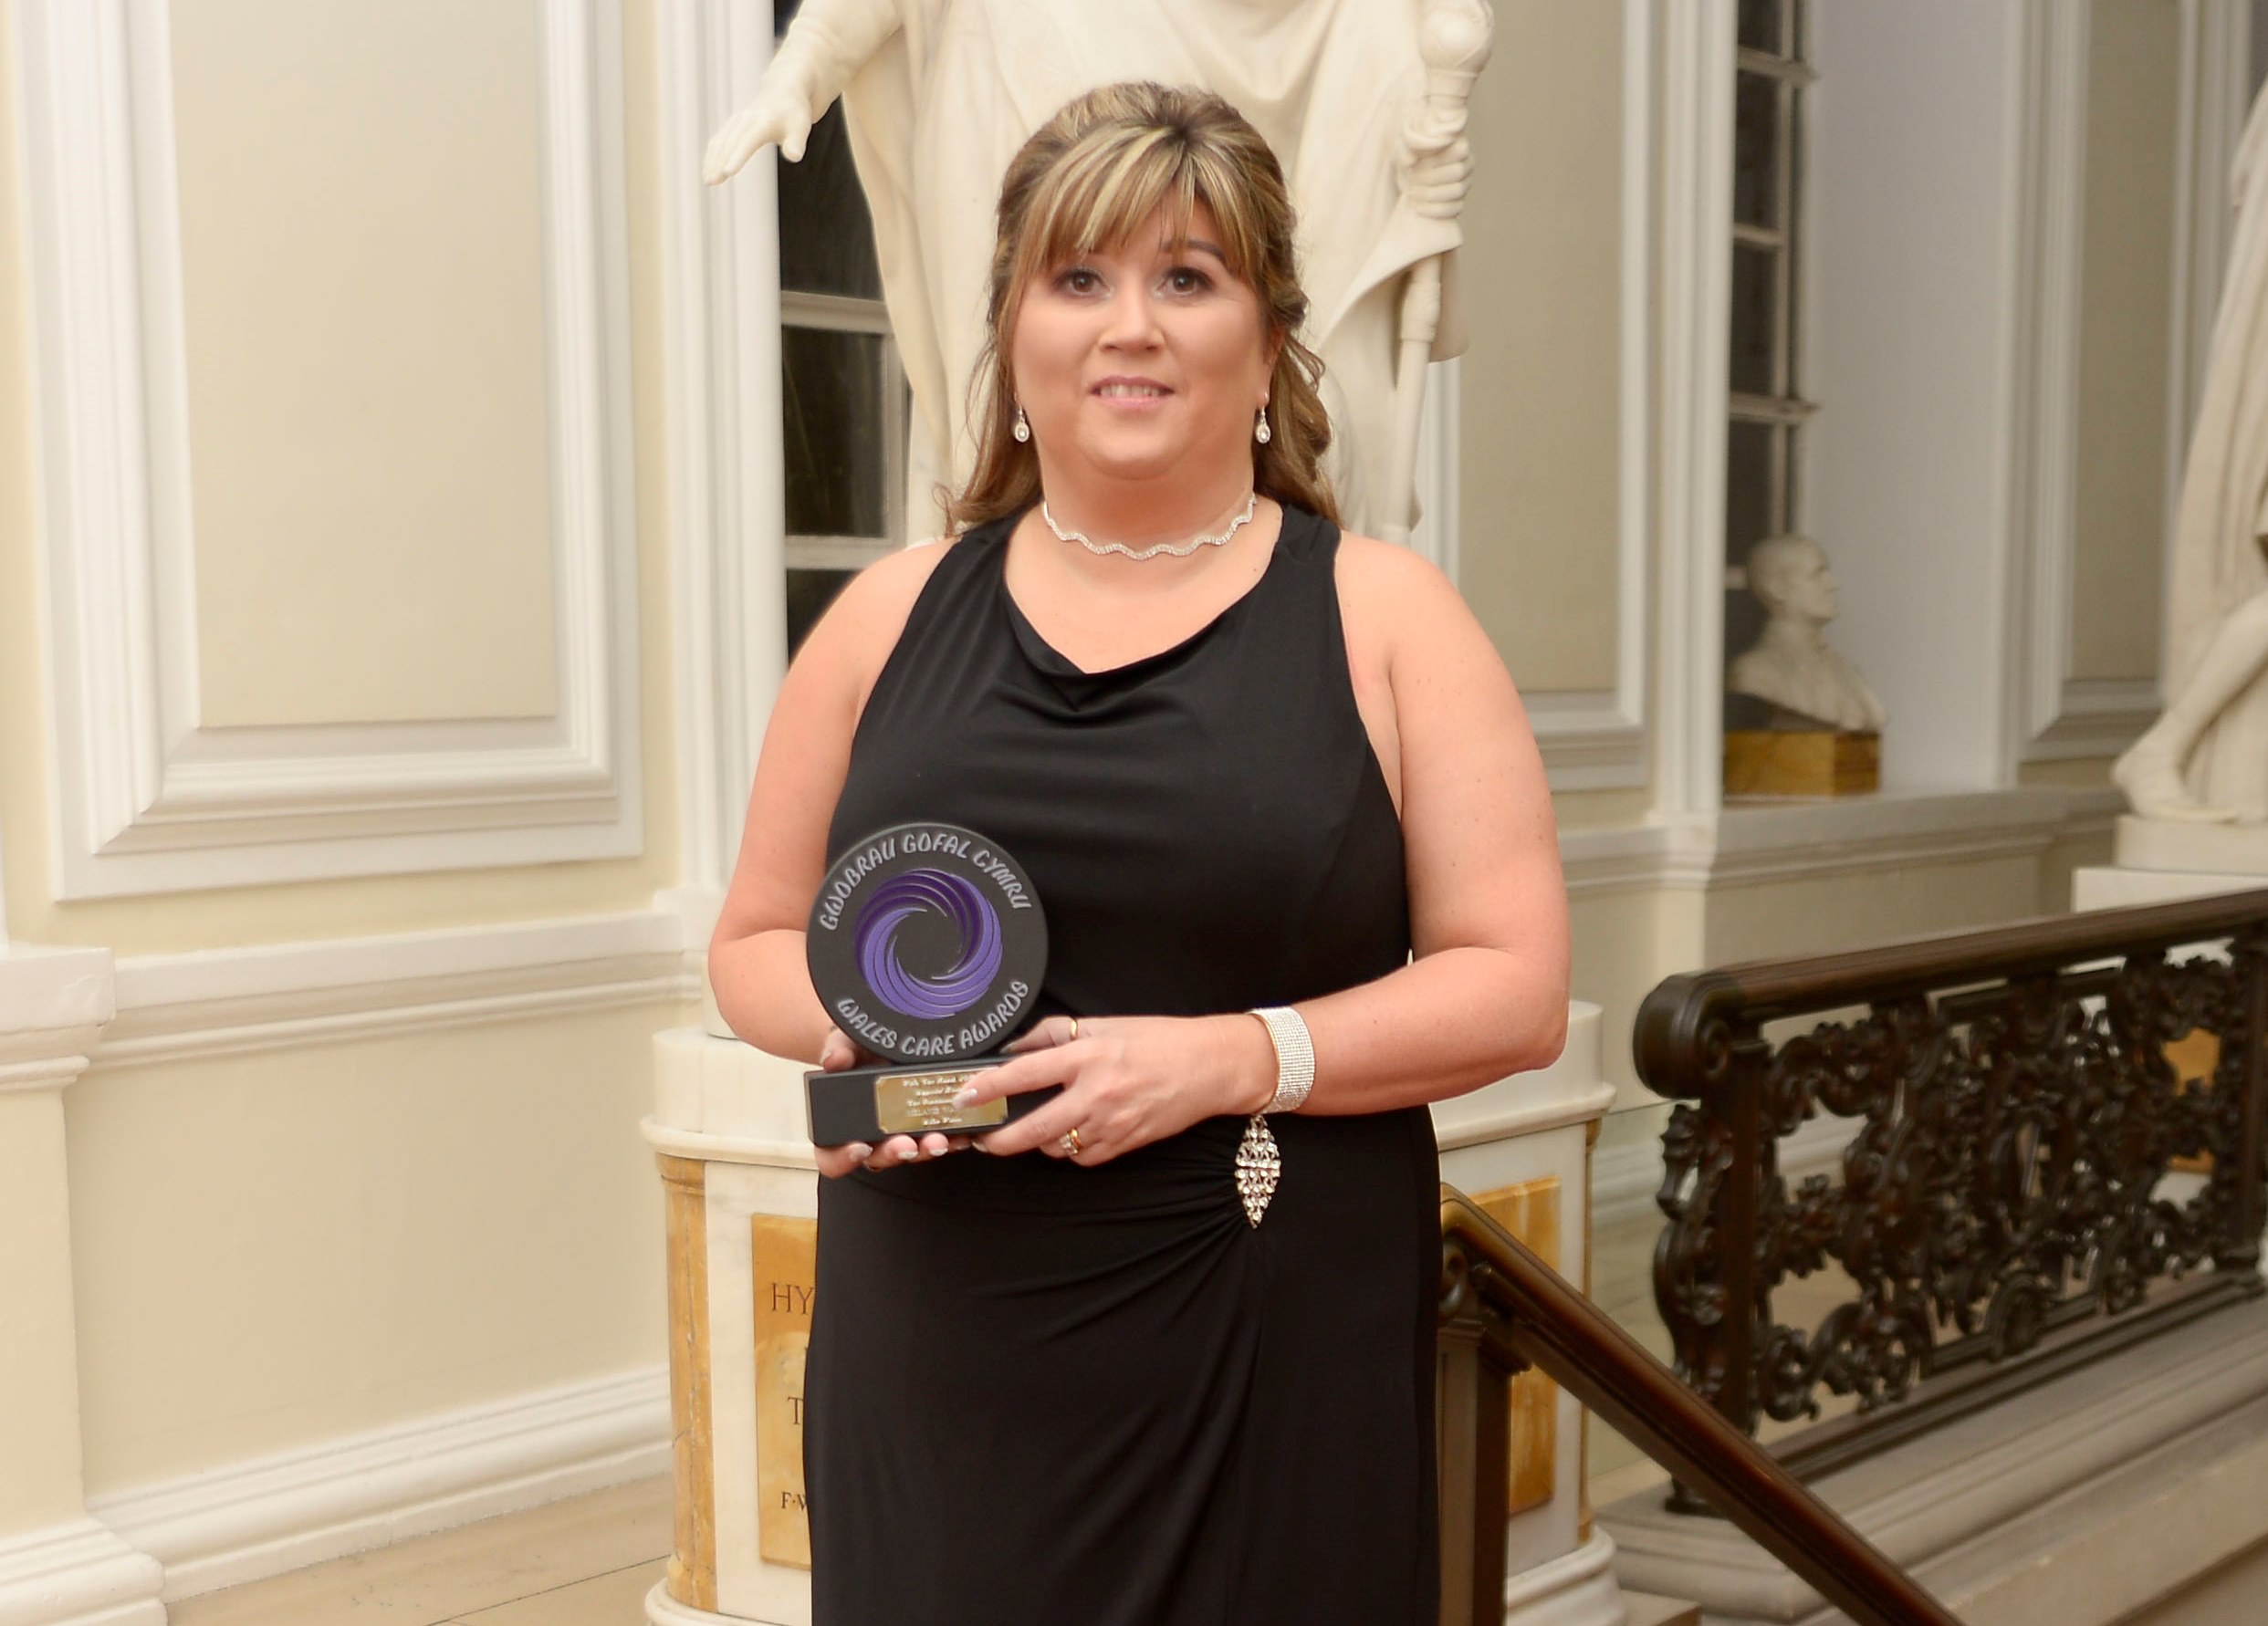 Home care assistant manager who harmonises with people by singing Tom Jones strikes silver in major national awards